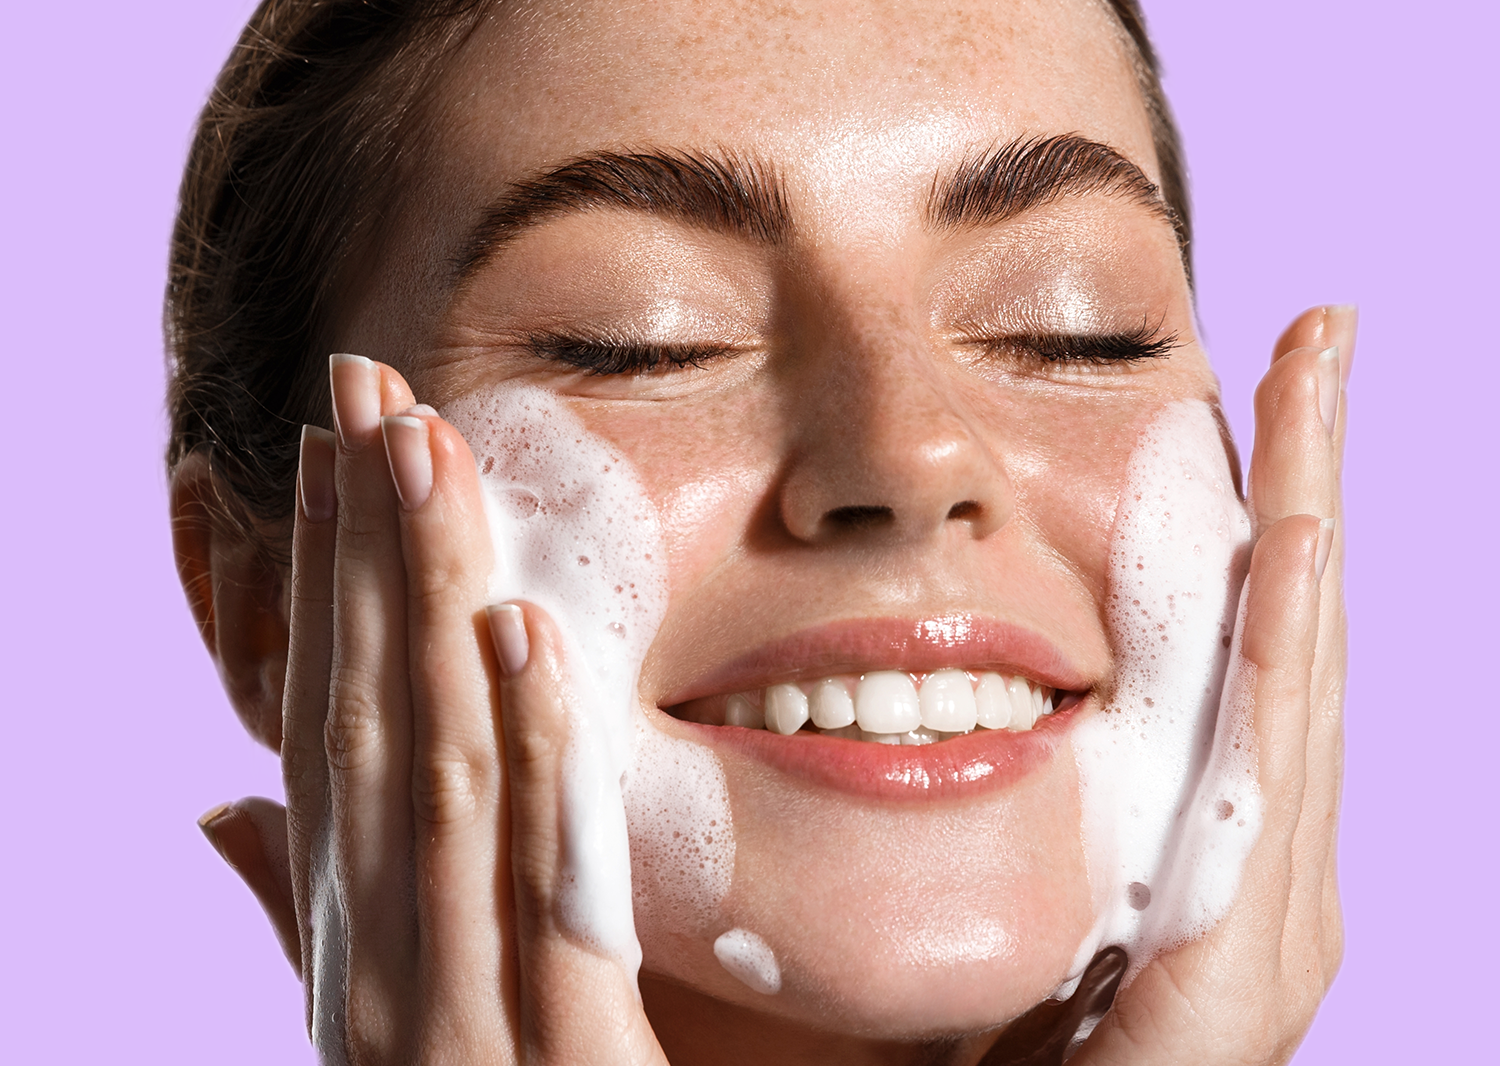 Skincare for Your 30s: Anti-Aging, Adult Acne, Oily Skin